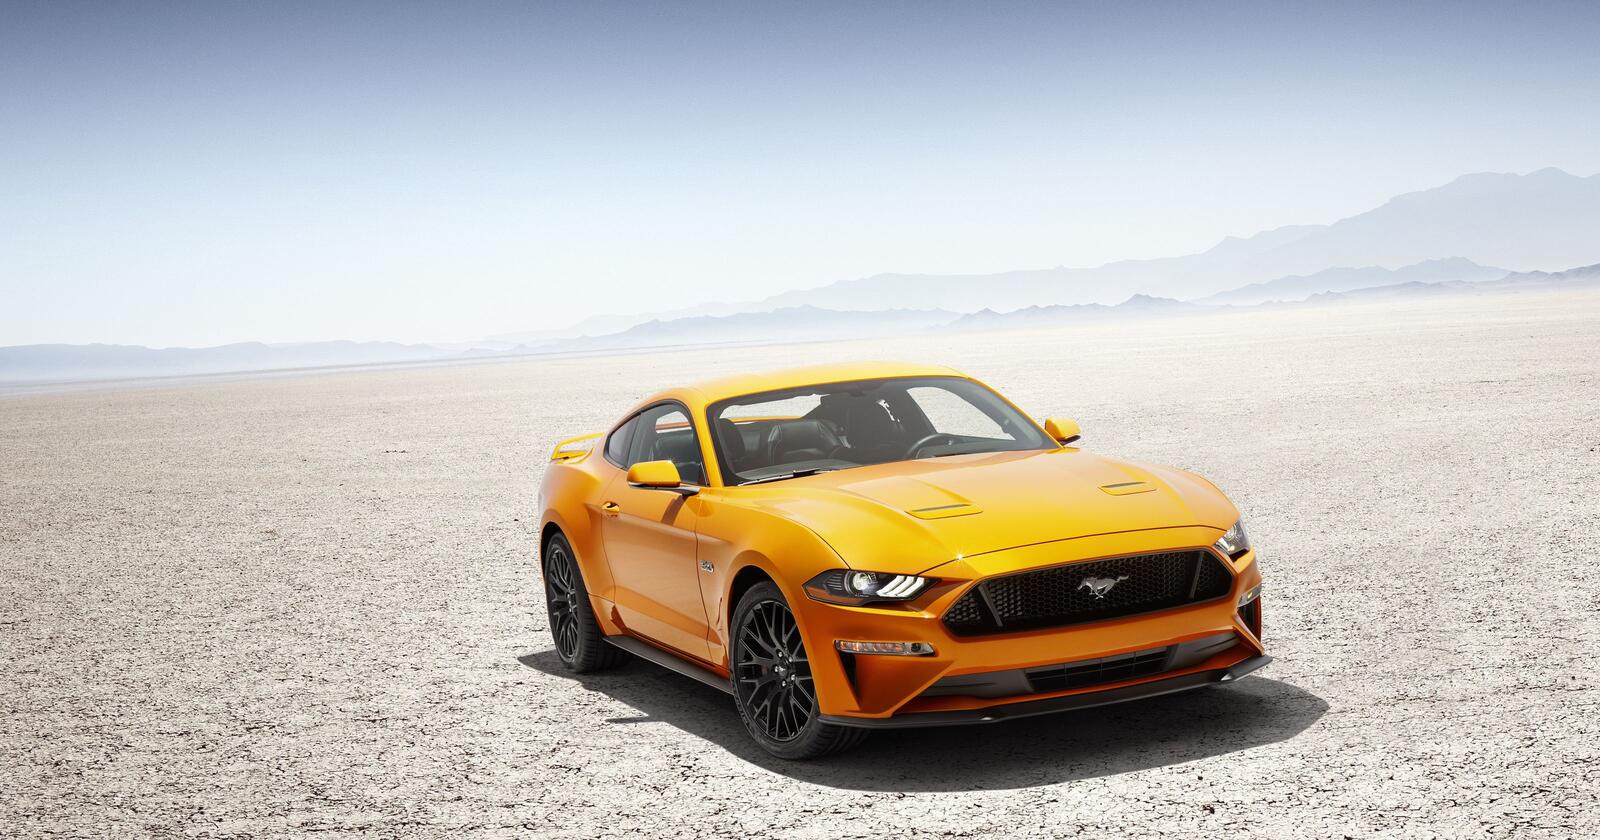 Wallpapers cars yellow car Ford Mustang on the desktop